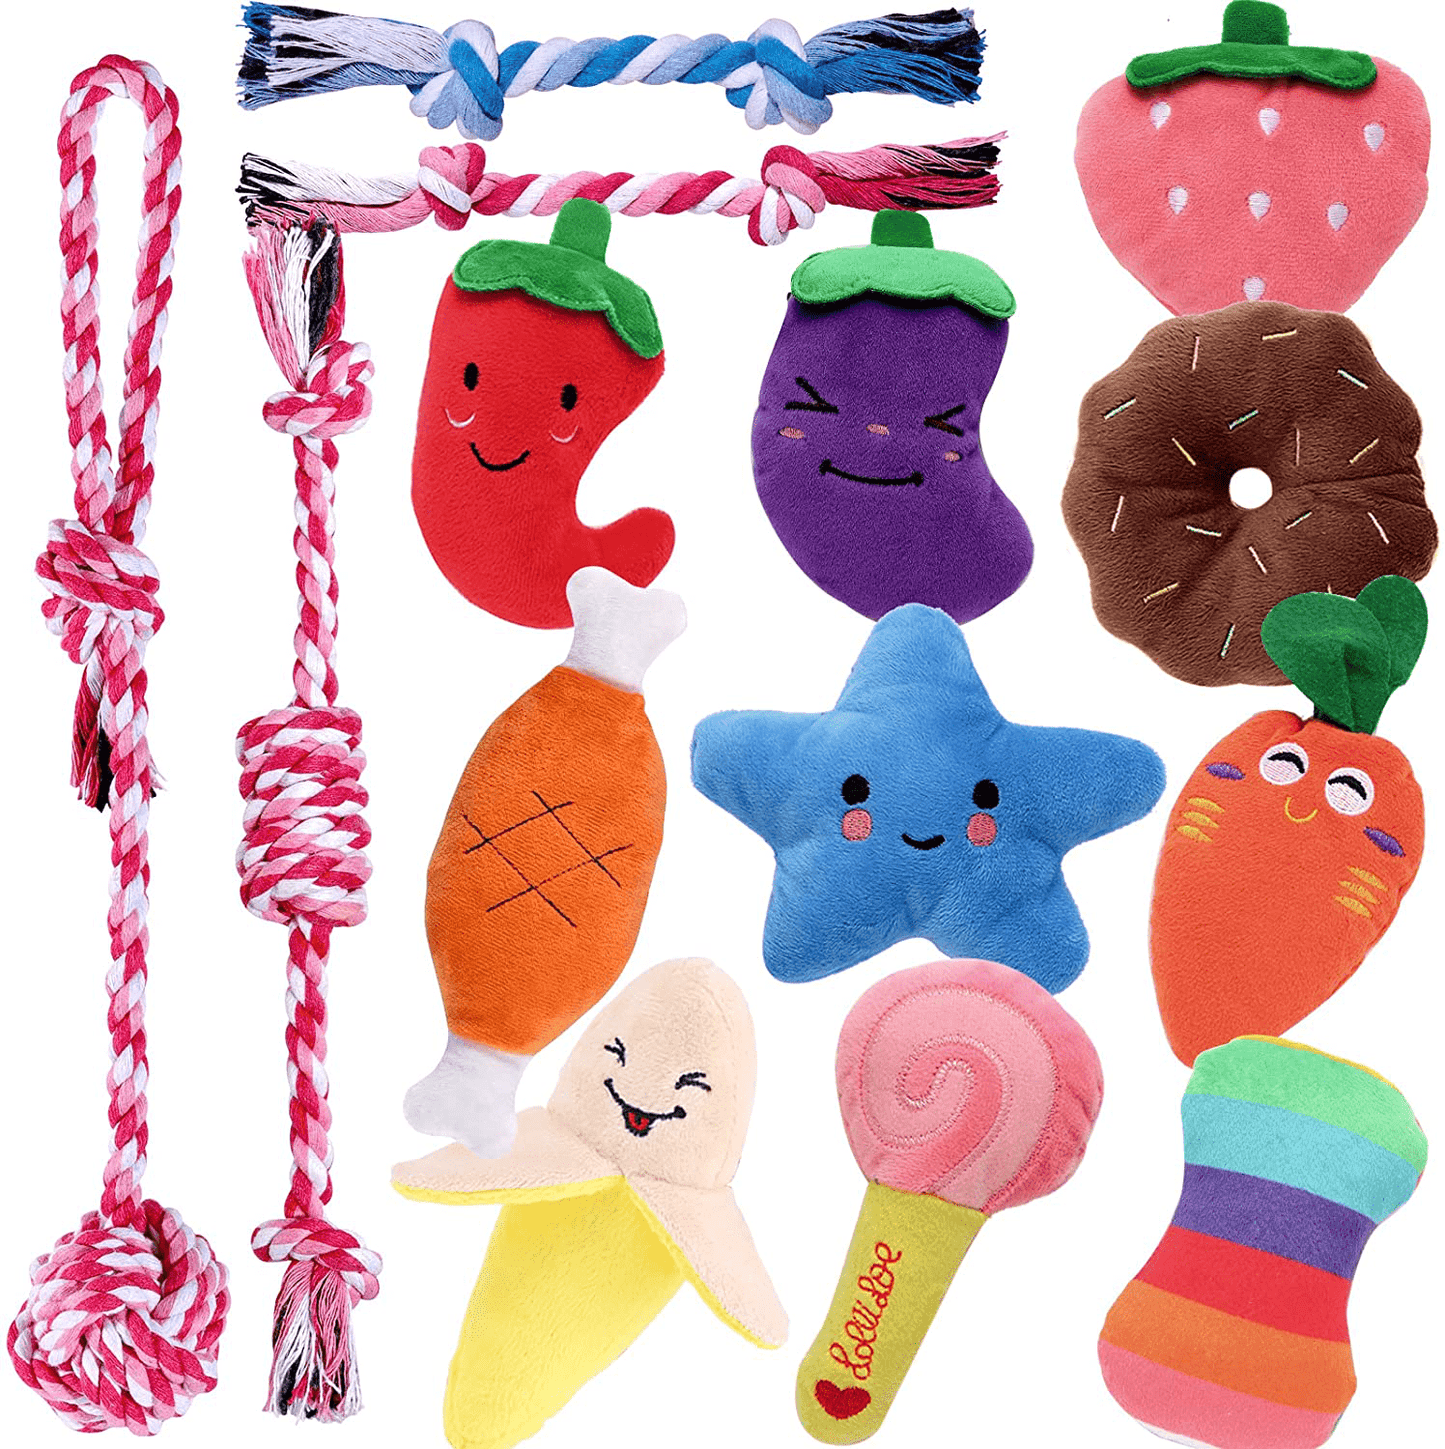 https://kol.pet/cdn/shop/products/8-pack-puppy-toys-squeaky-plush-dog-toys-for-small-dogs-cute-puppy-teething-chew-toy-indestructible-iq-treat-ball-and-safe-ropes-toys-28732713664585_1445x.png?v=1681009914